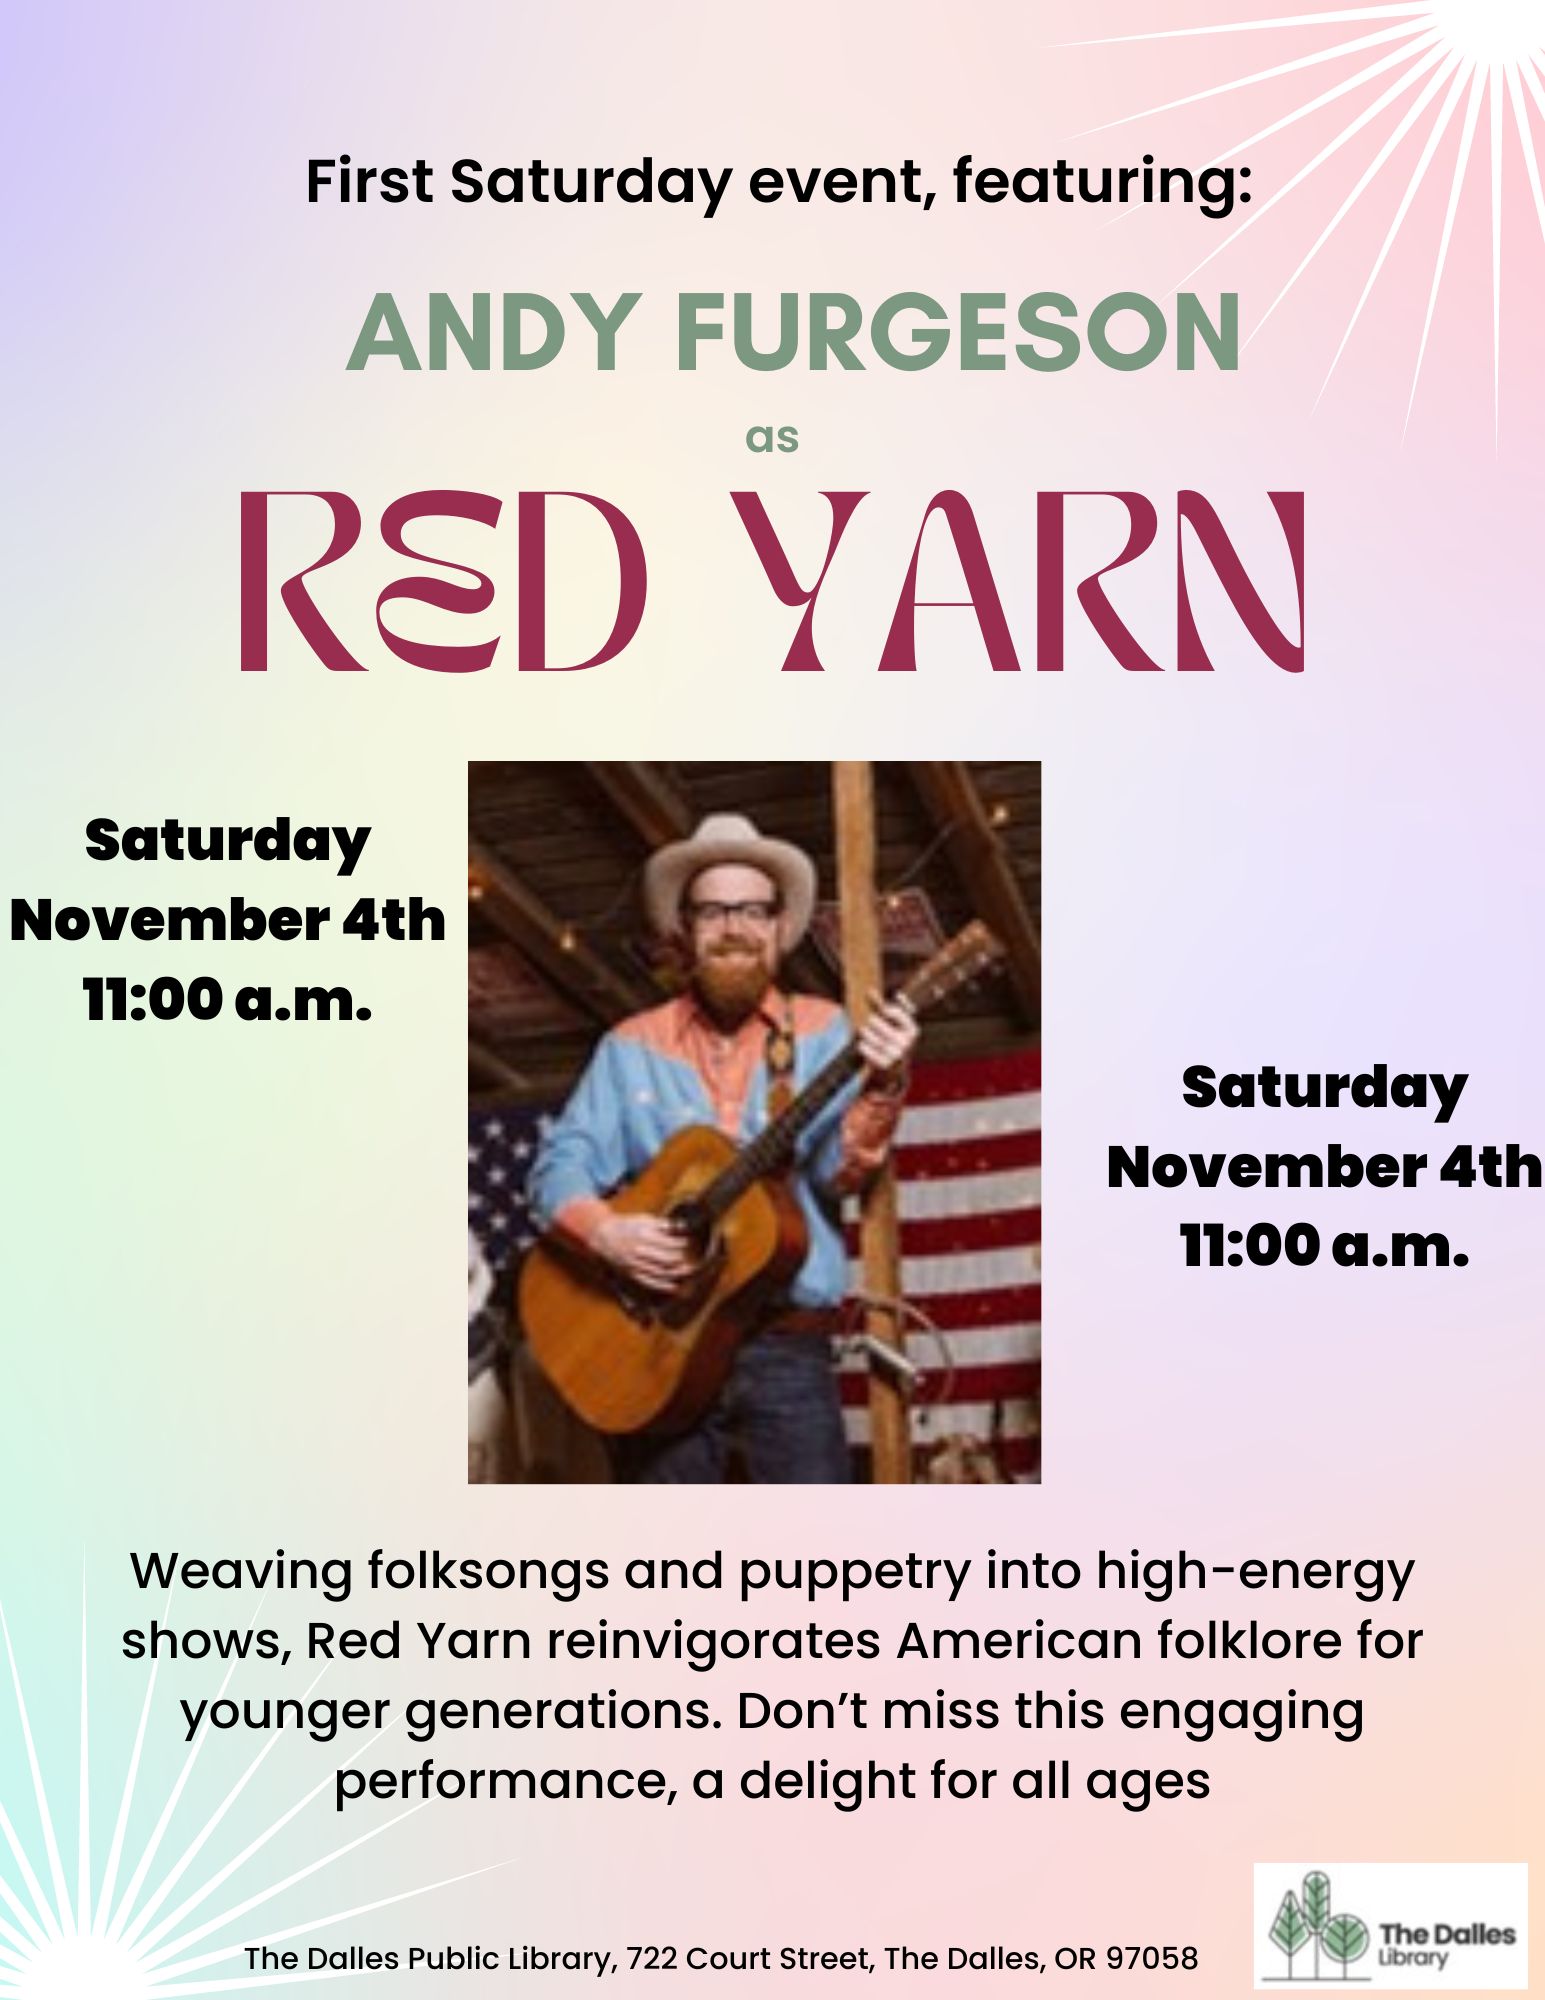 Red Yarn, he'll have you dancing and singing along